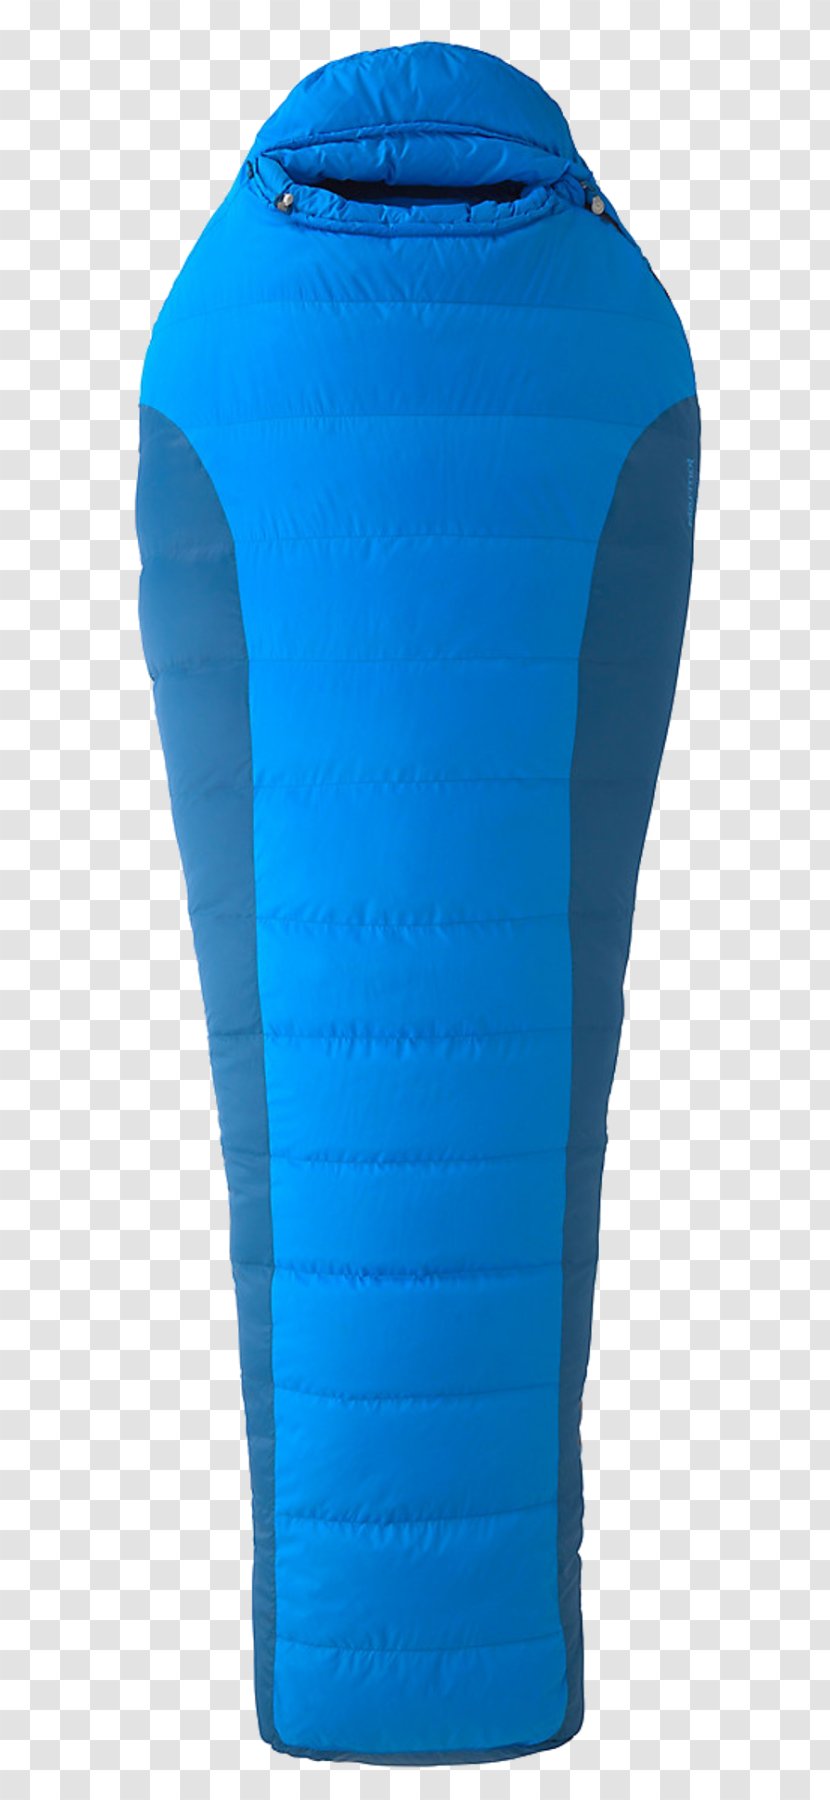 Sleeping Bags Marmot Backpacking Camping - Turquoise - Bag Transparent PNG